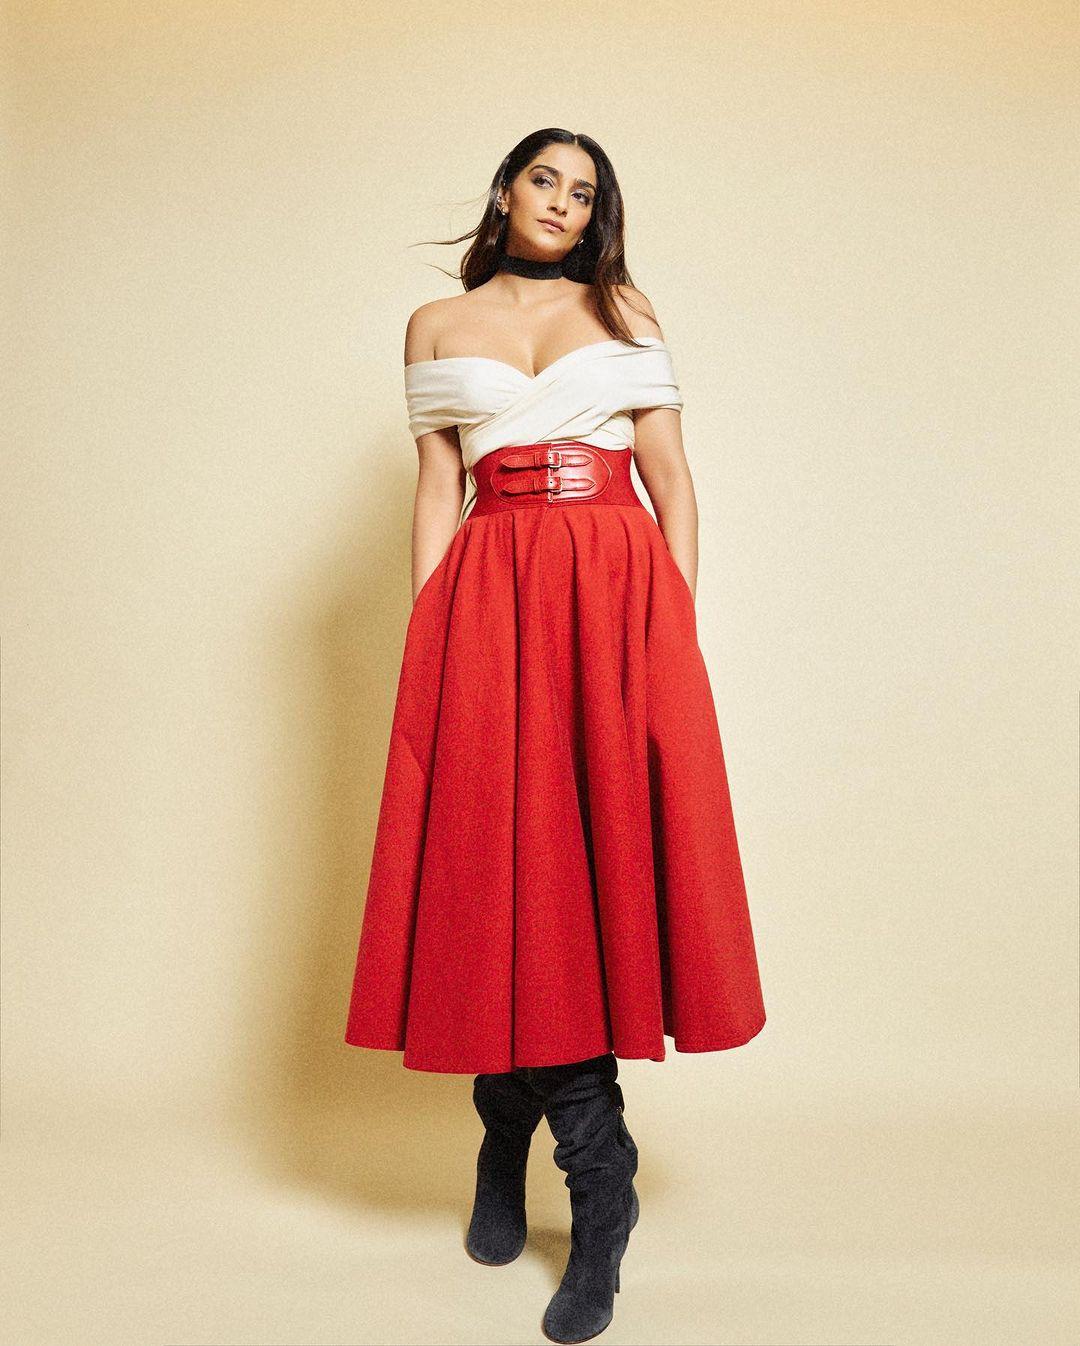 The actress donned a white off-shoulder crop top paired with a red shirt and black boots, creating a winning combination. With her signature straight hair and minimal makeup, Sonam effortlessly wowed everyone, showcasing a style that is both elegant and perfect for a romantic occasion.